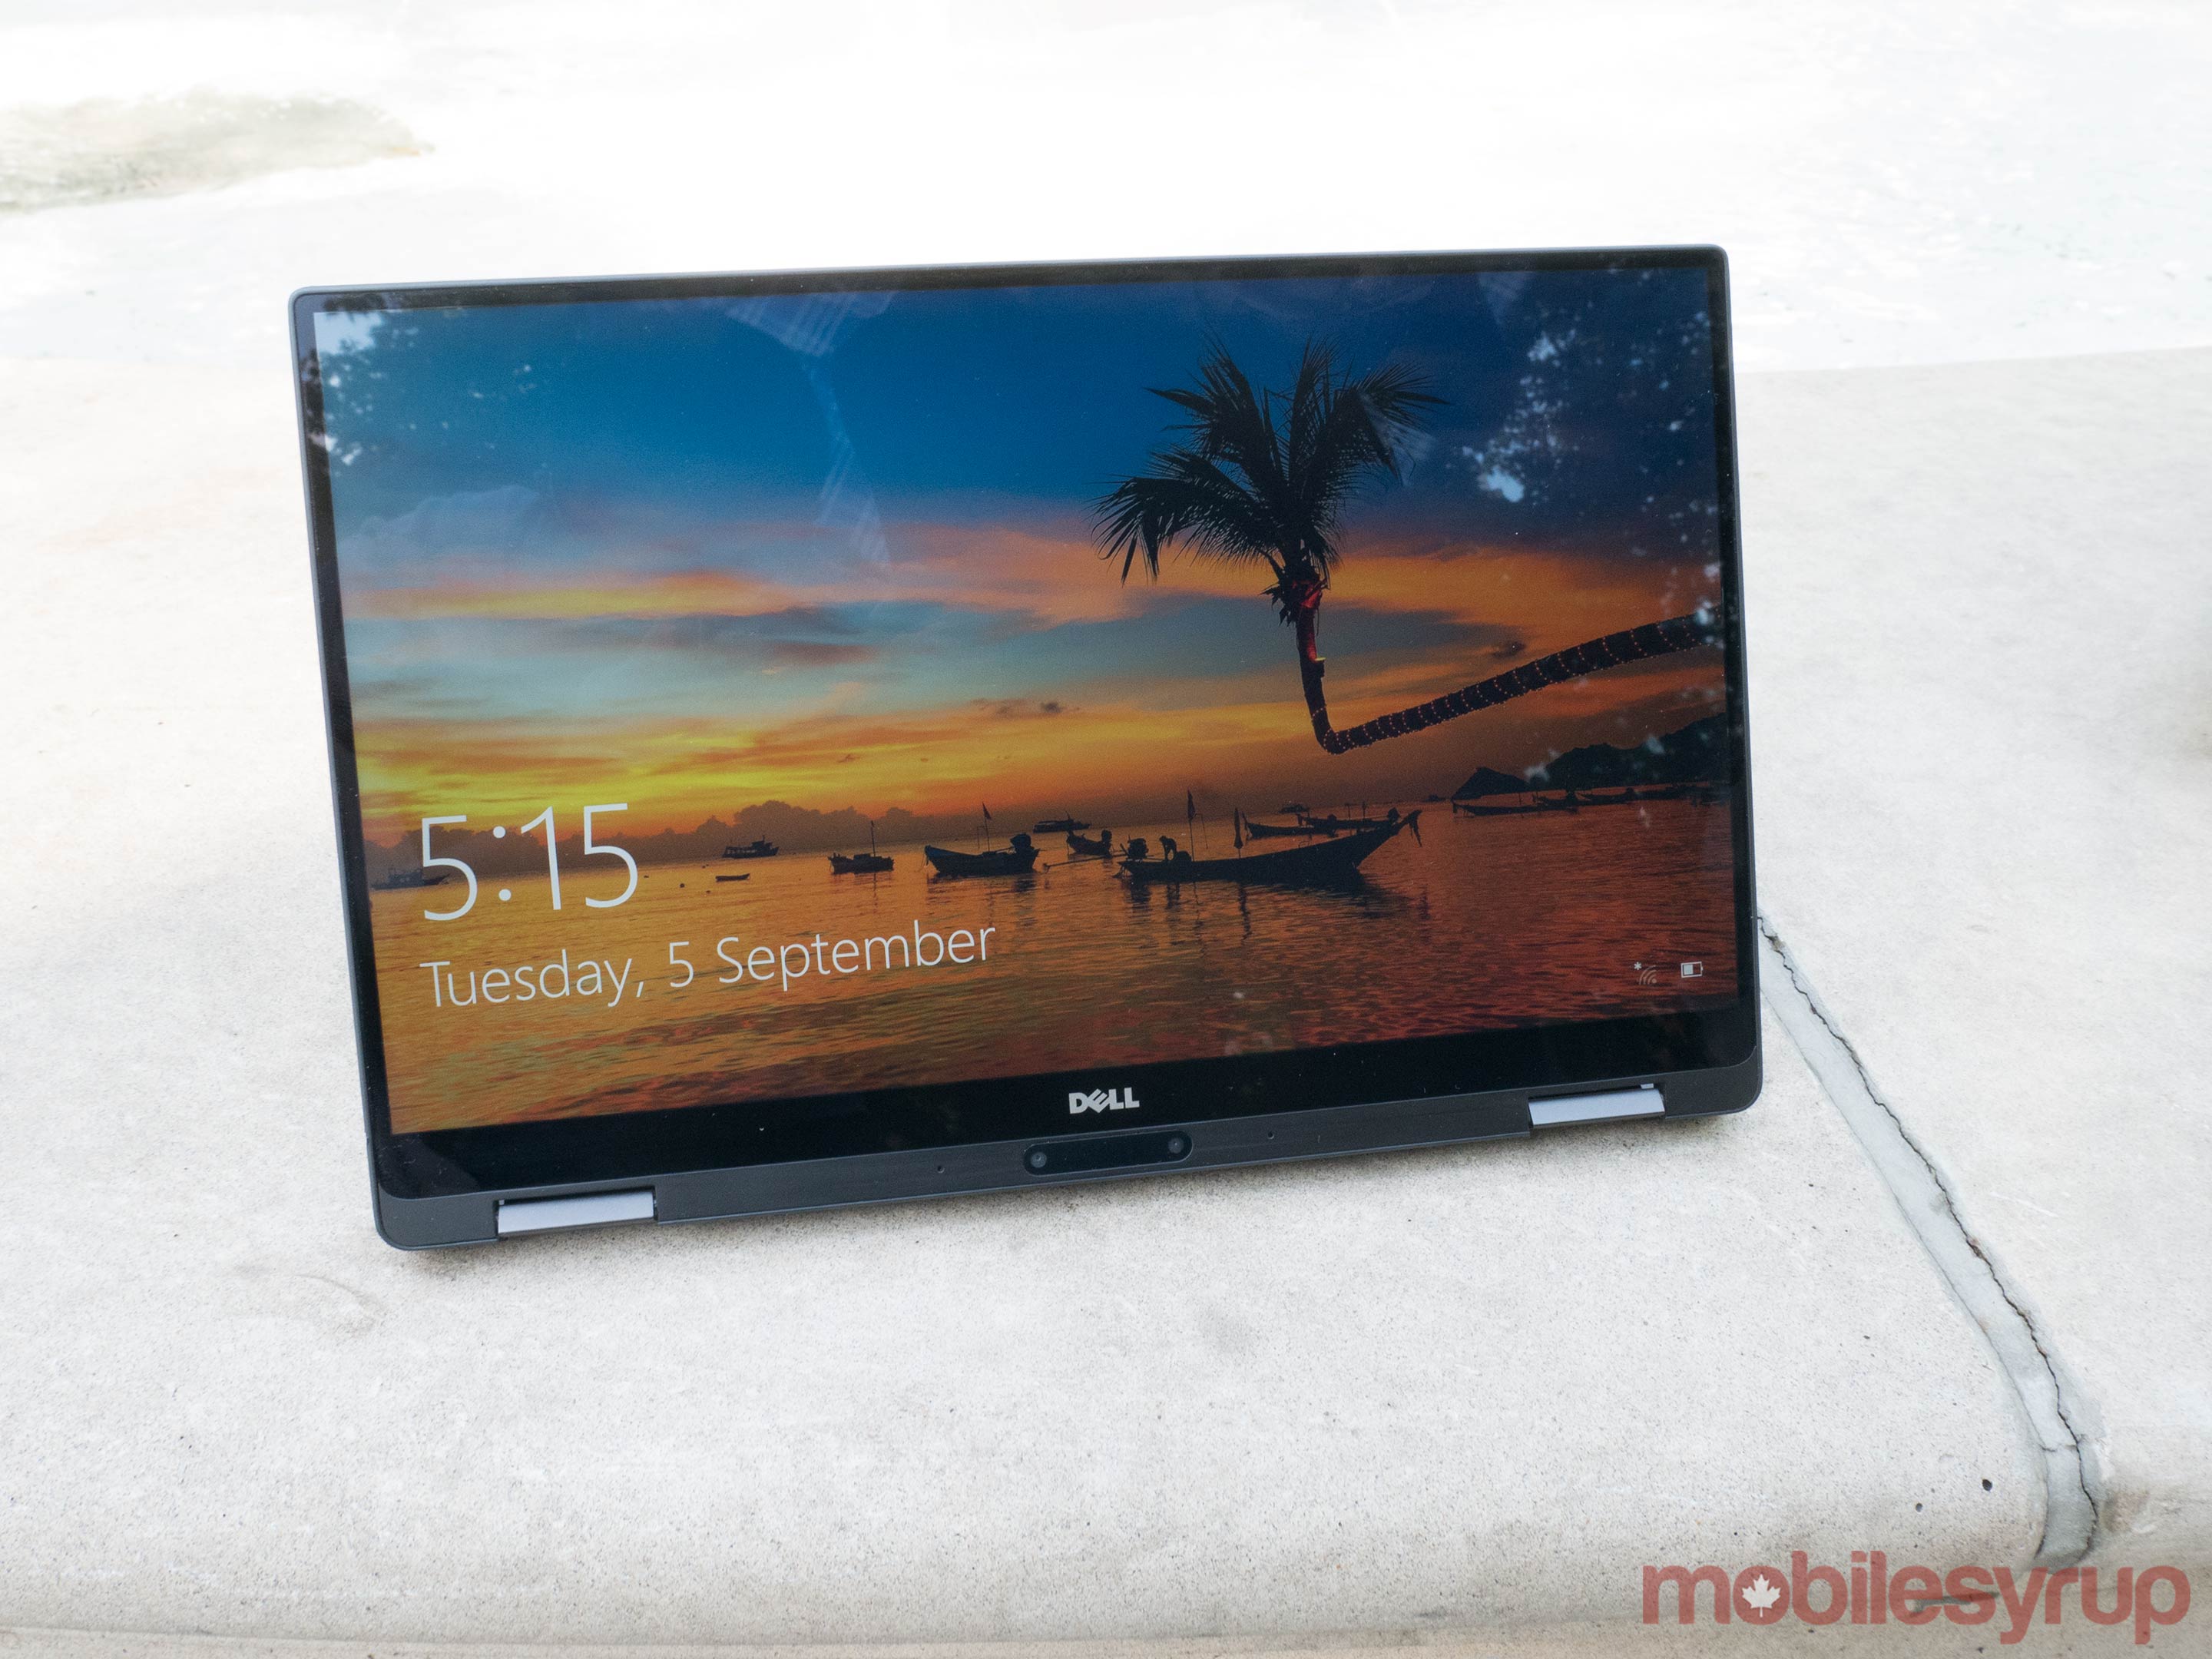 Dell XPS 13 tablet